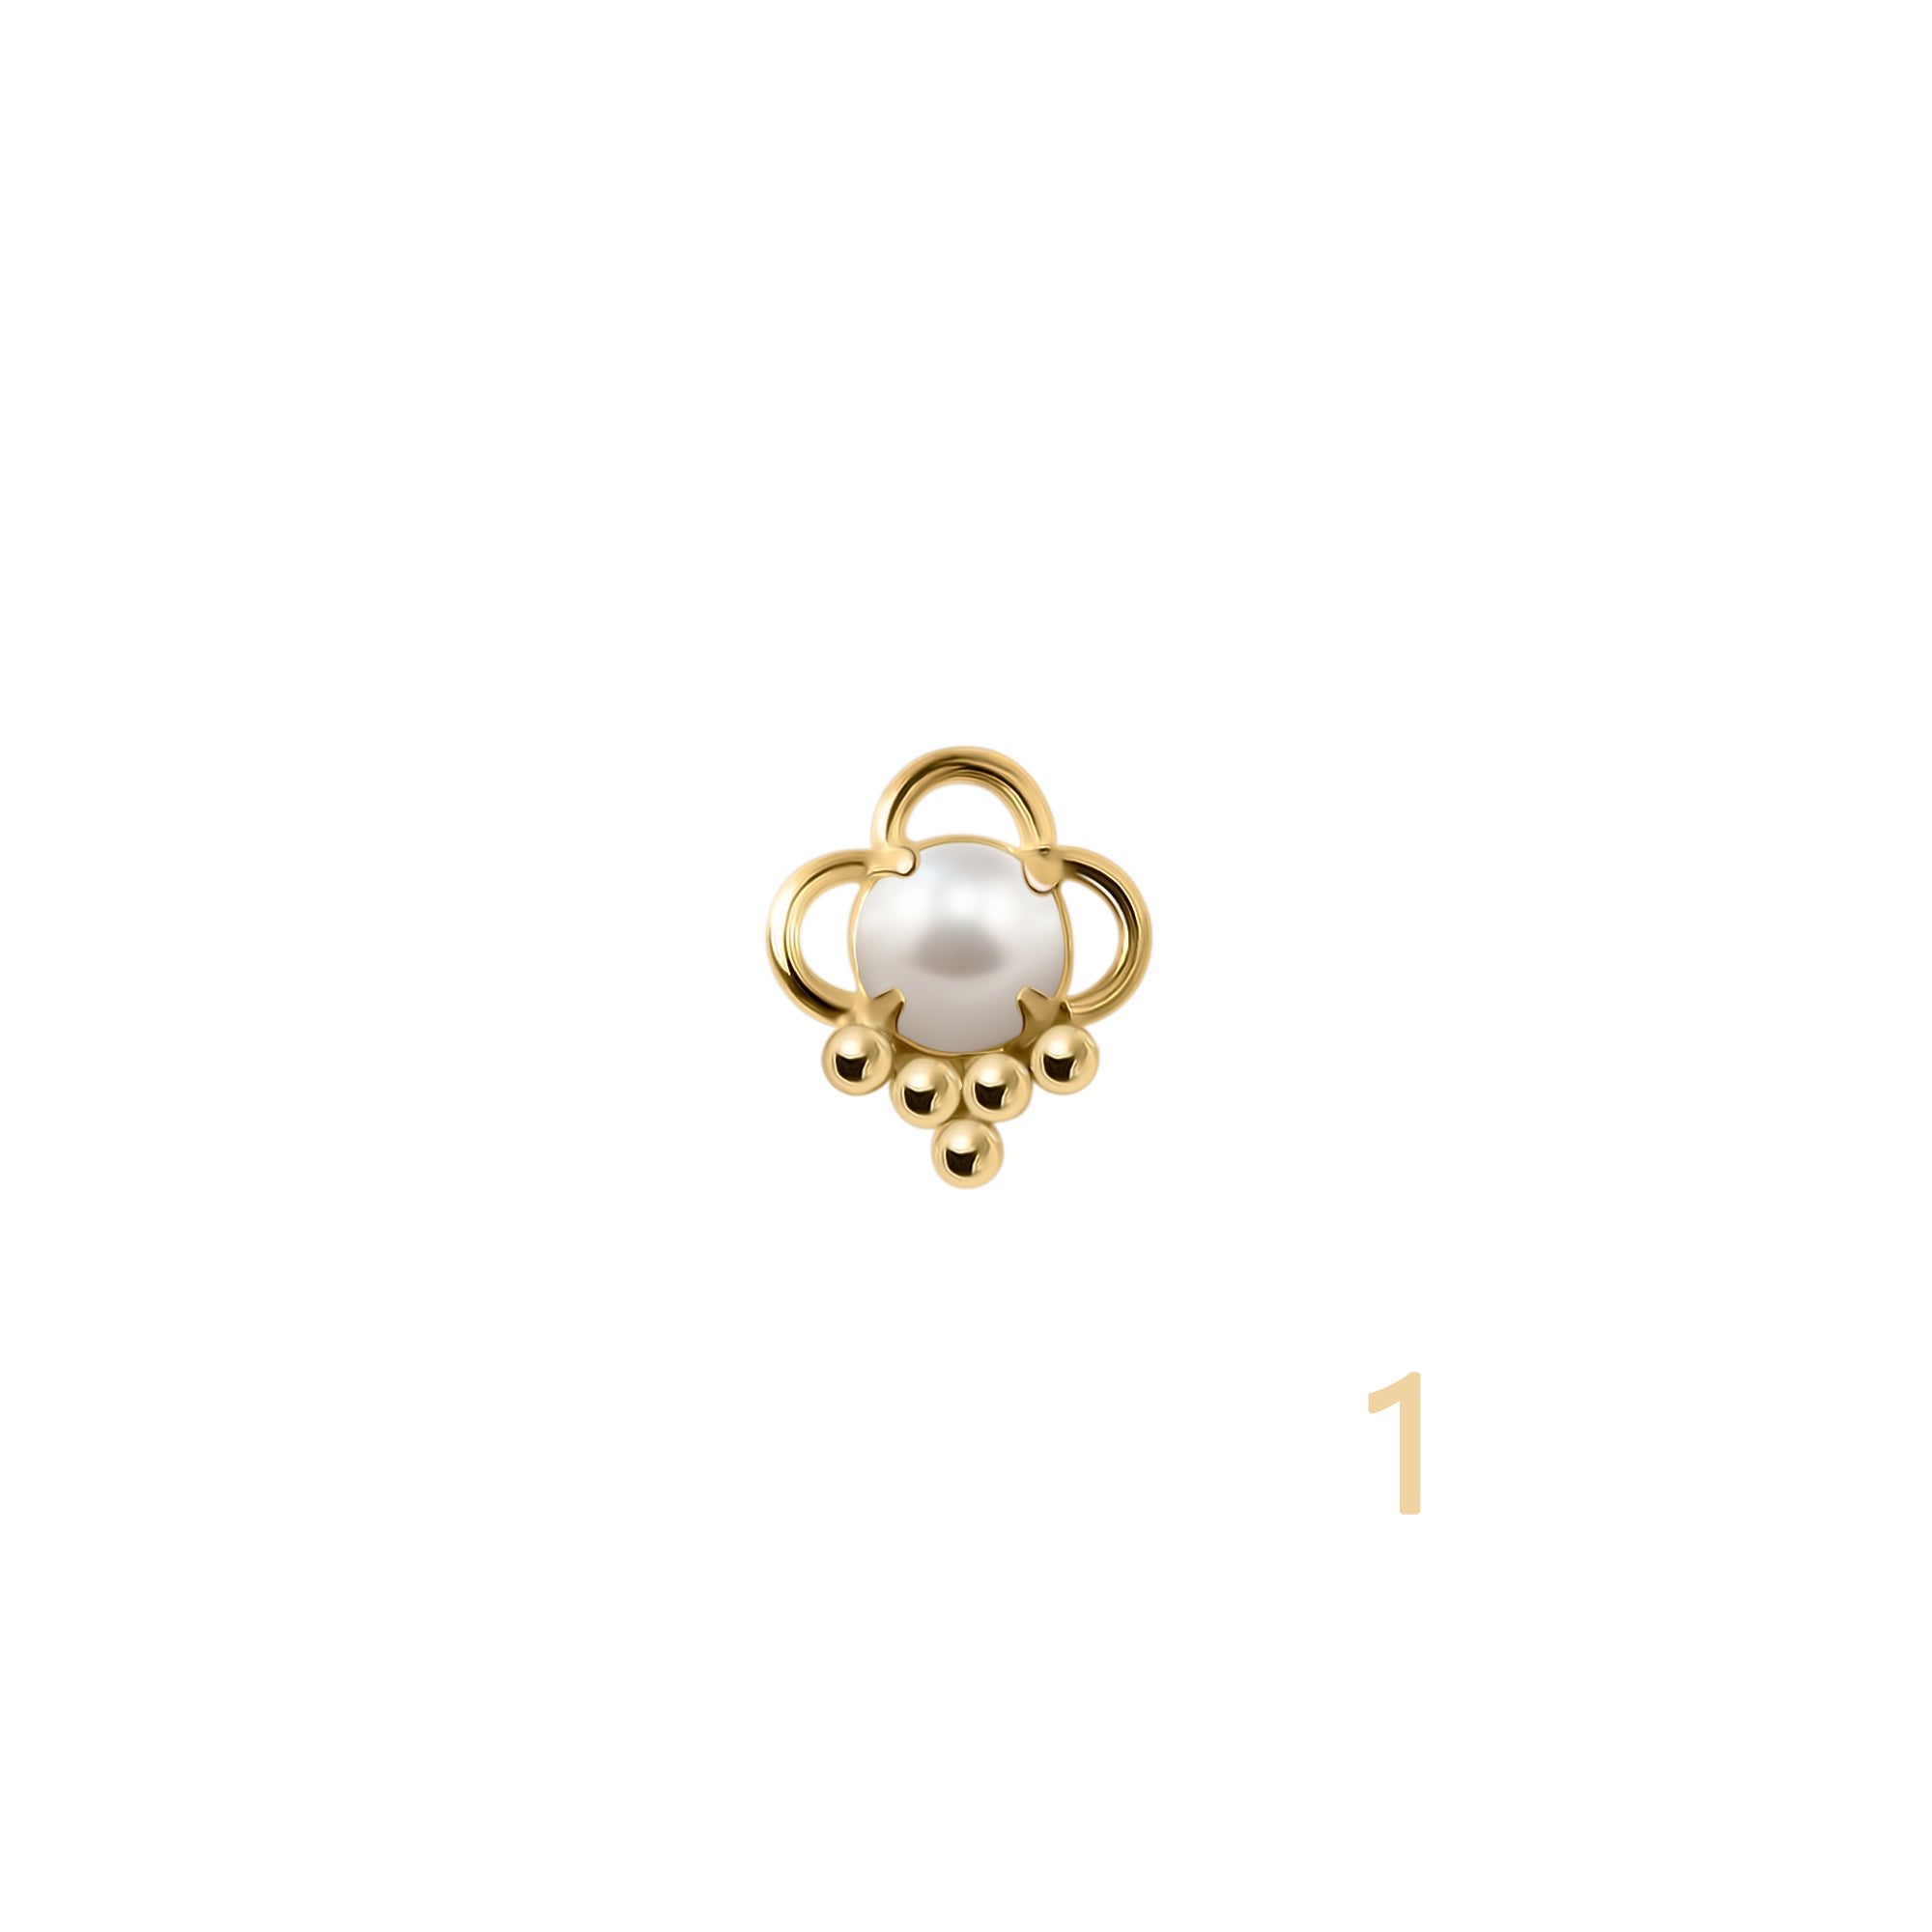 22kt Gold, Pearl Nose Rings Twists